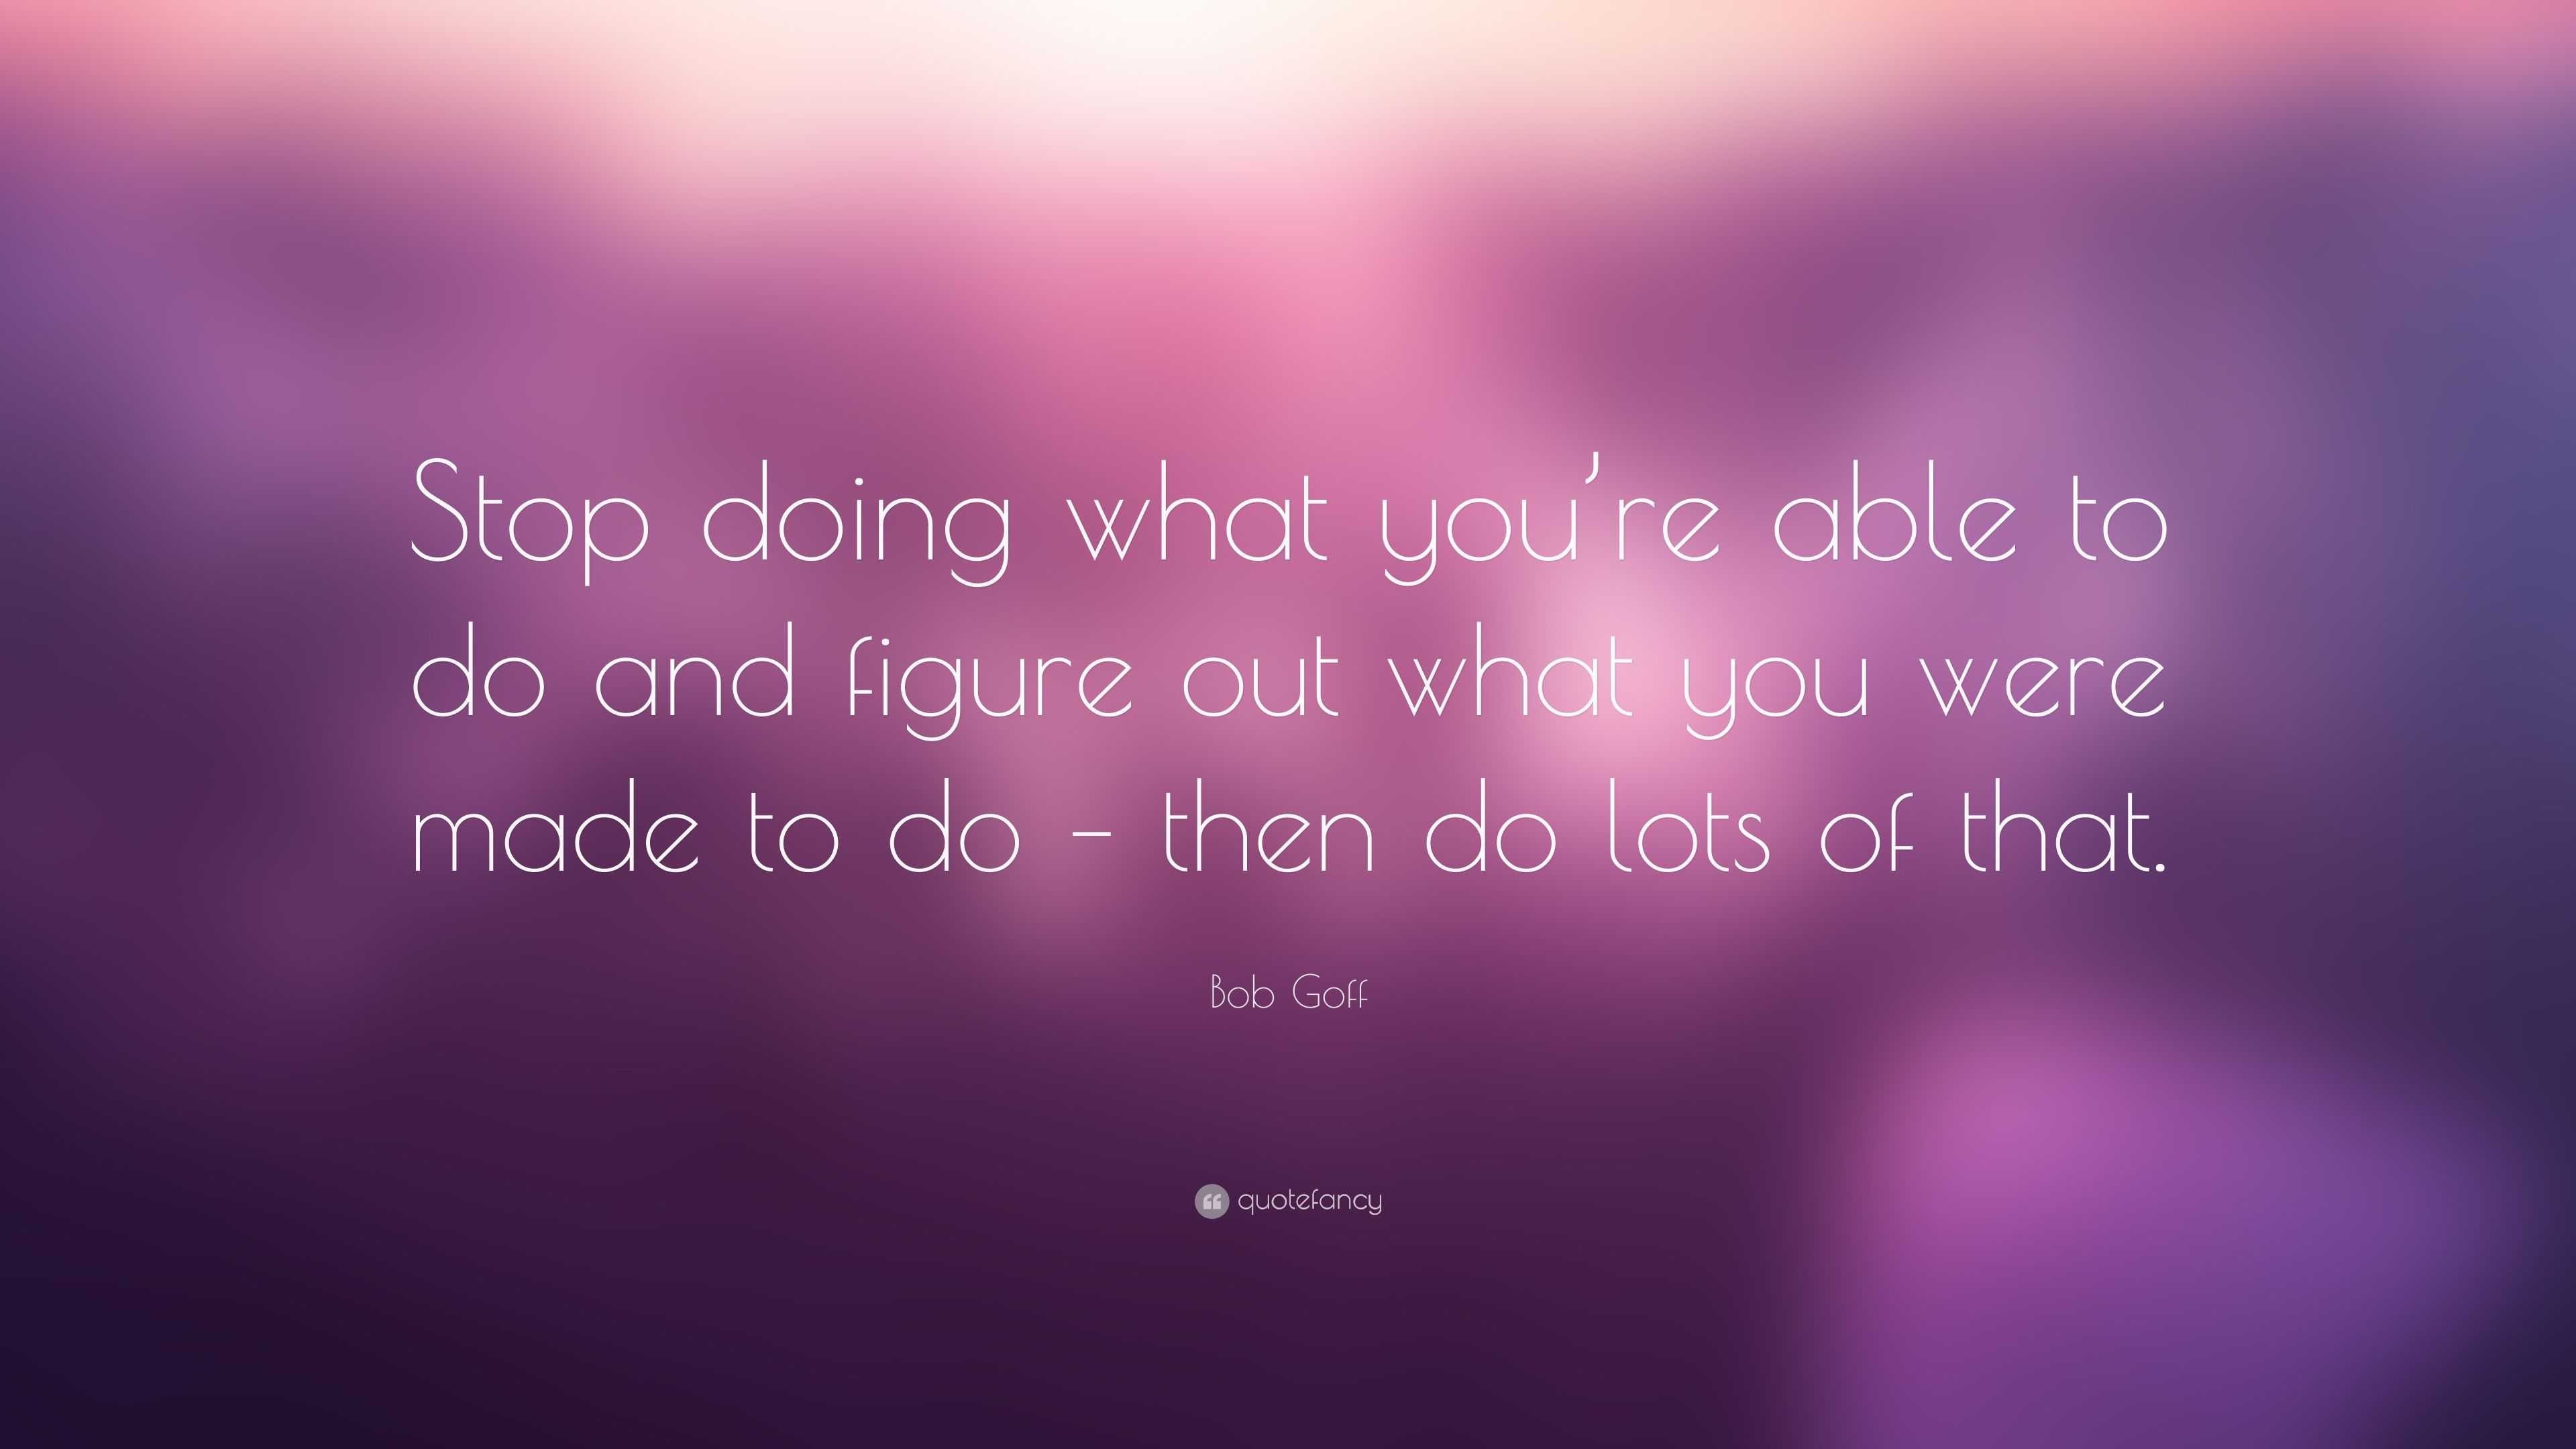 Bob Goff Quote: “Stop doing what you’re able to do and figure out what ...